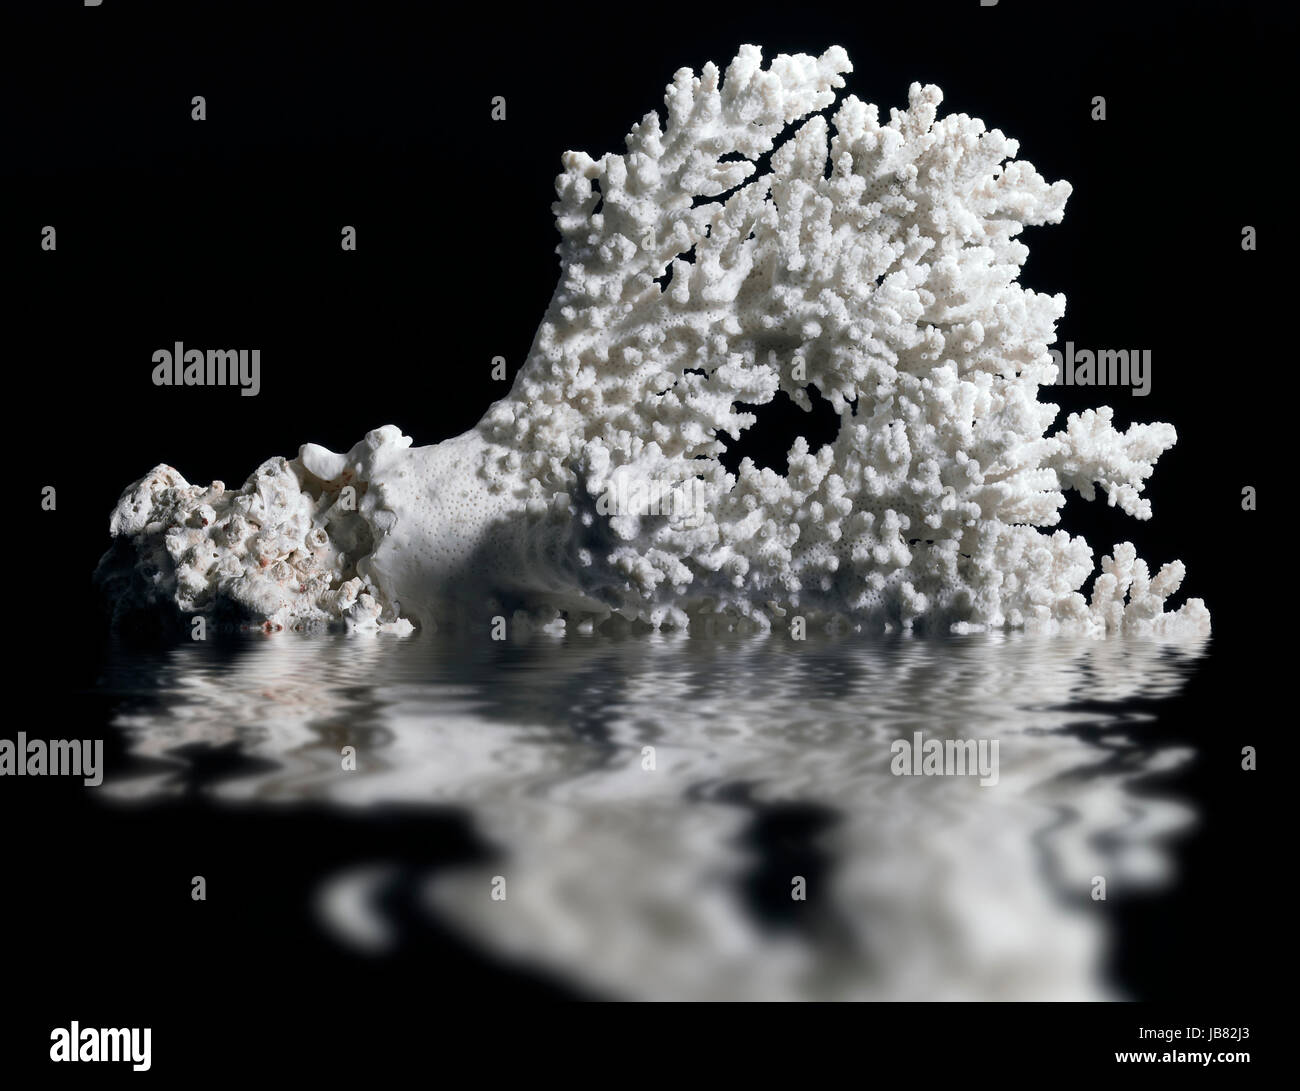 white coral on mirroring water surface in black back Stock Photo